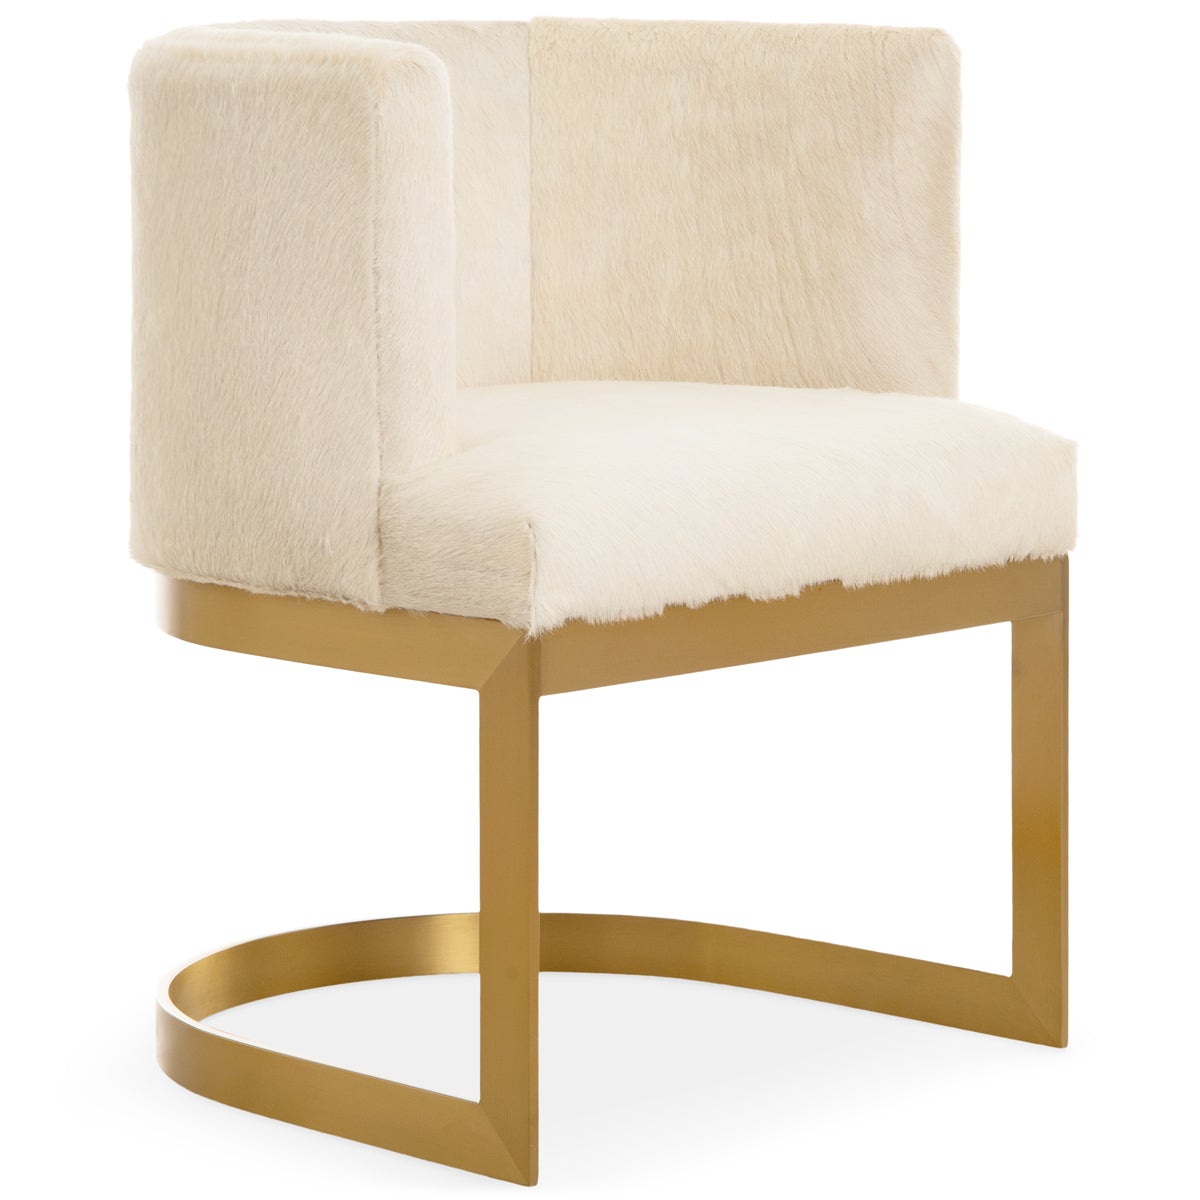 Ibiza Dining Chair in Brushed Brass and Cowhide - ModShop1.com